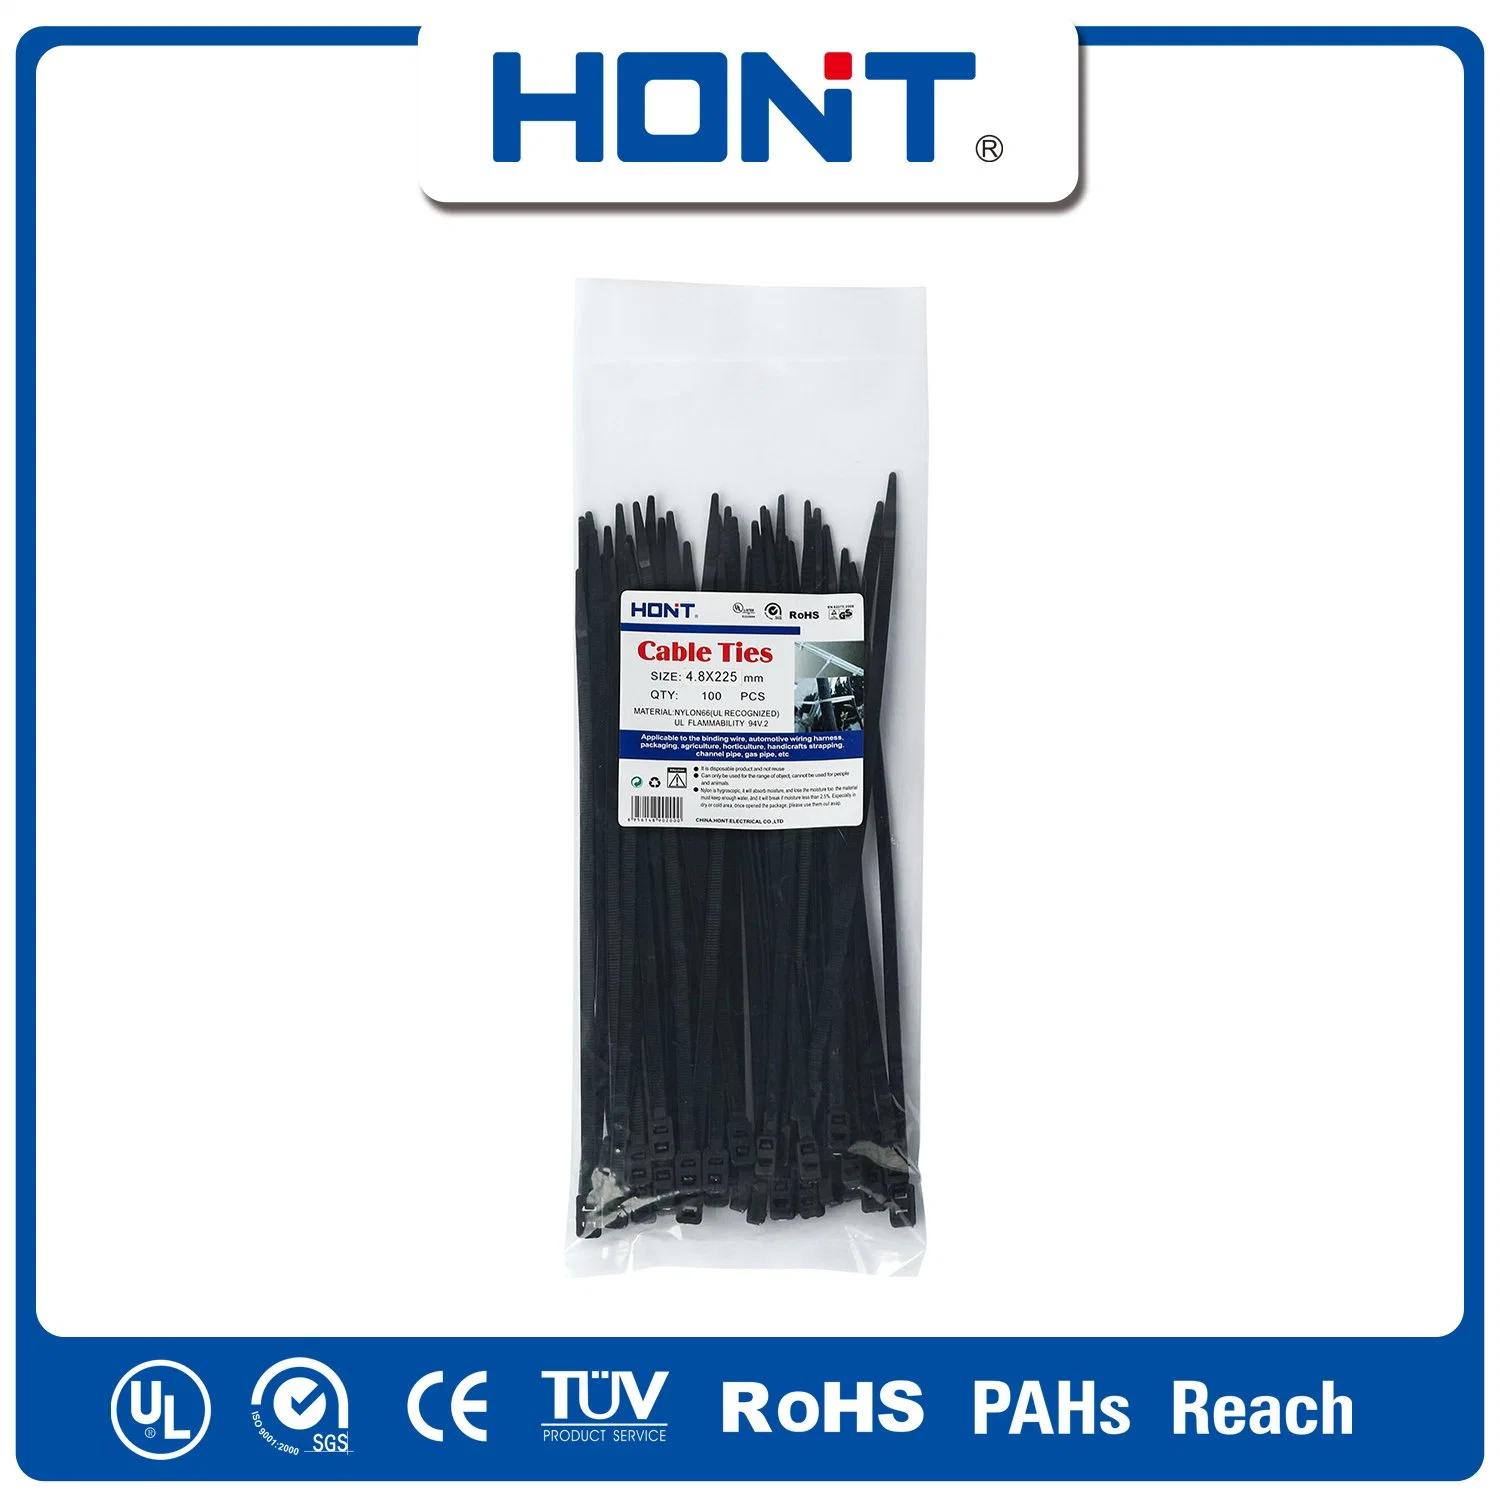 Hont Plastic Bag + Erosion Carton/Tray Releasable Ties Nylon Cable Tie with ISO9001